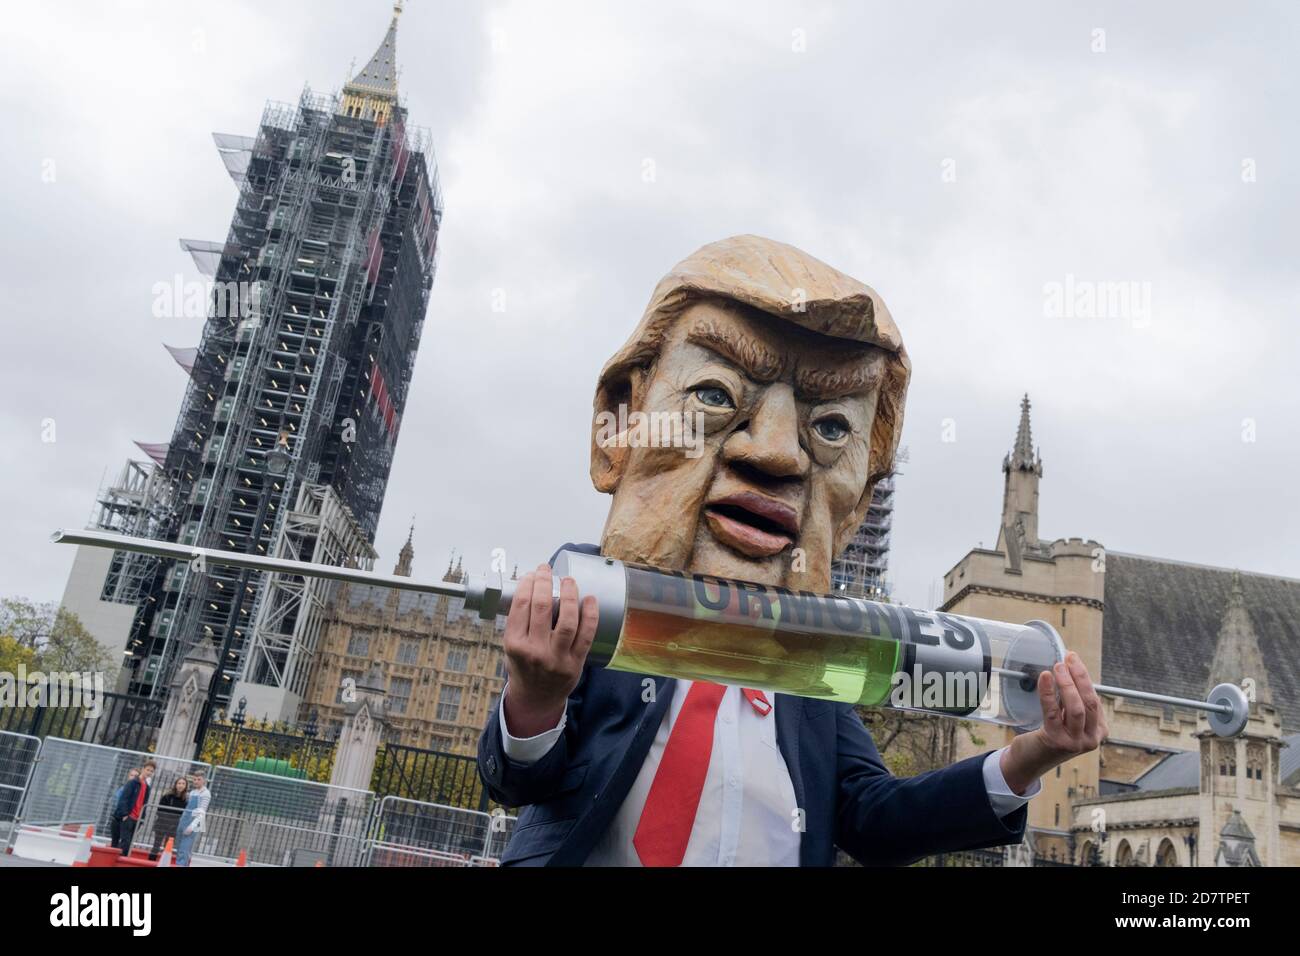 Ten days ahead of the US Presidential elections, a Donald Trump lookalike holds a symbolic syringe containing the hormones that protesters say will be injected into livestock and sold to UK consumers if the UK negotiates a trade deal with the US, on 24th October 2020, in Westminster, London, England. Organisers, Global Justice Now say, 'The trade deal could lead to the NHS being opened up permanently to American healthcare companies; chlorinated chicken and hormone-fed beef; forced deregulation of the UK’s environmental laws, workers’ rights and rights to data privacy; and new rules that make Stock Photo